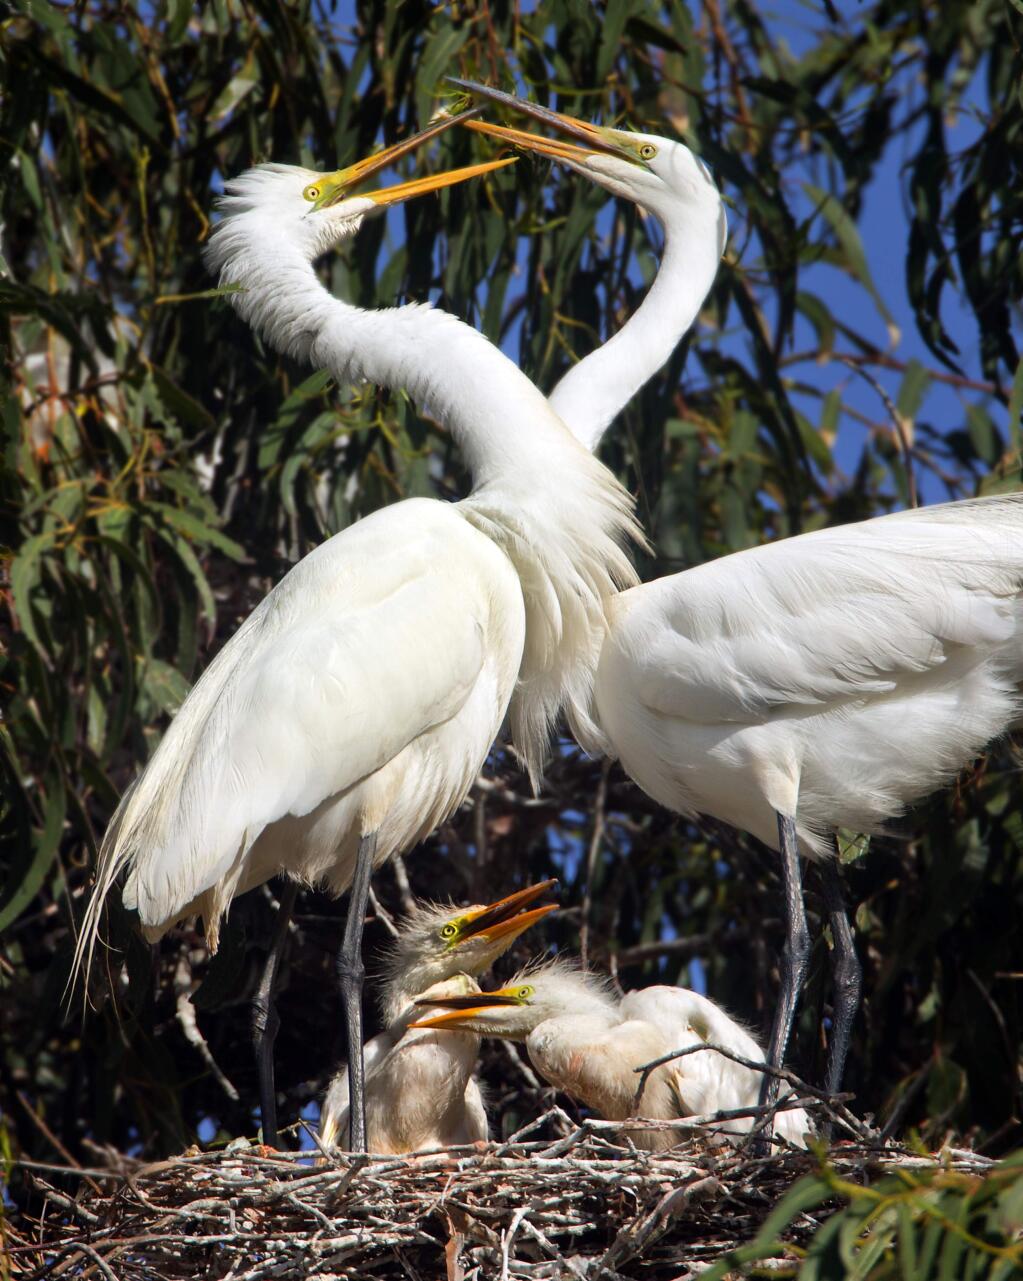 More than 300 students from Lincoln Elementary School in Santa Rosa visited their local rookery in eucalyptus trees along Ninth St. A nesting pair of Great White Egrets great each other over their young chicks on Friday. (photo by John Burgess/The Press Democrat)